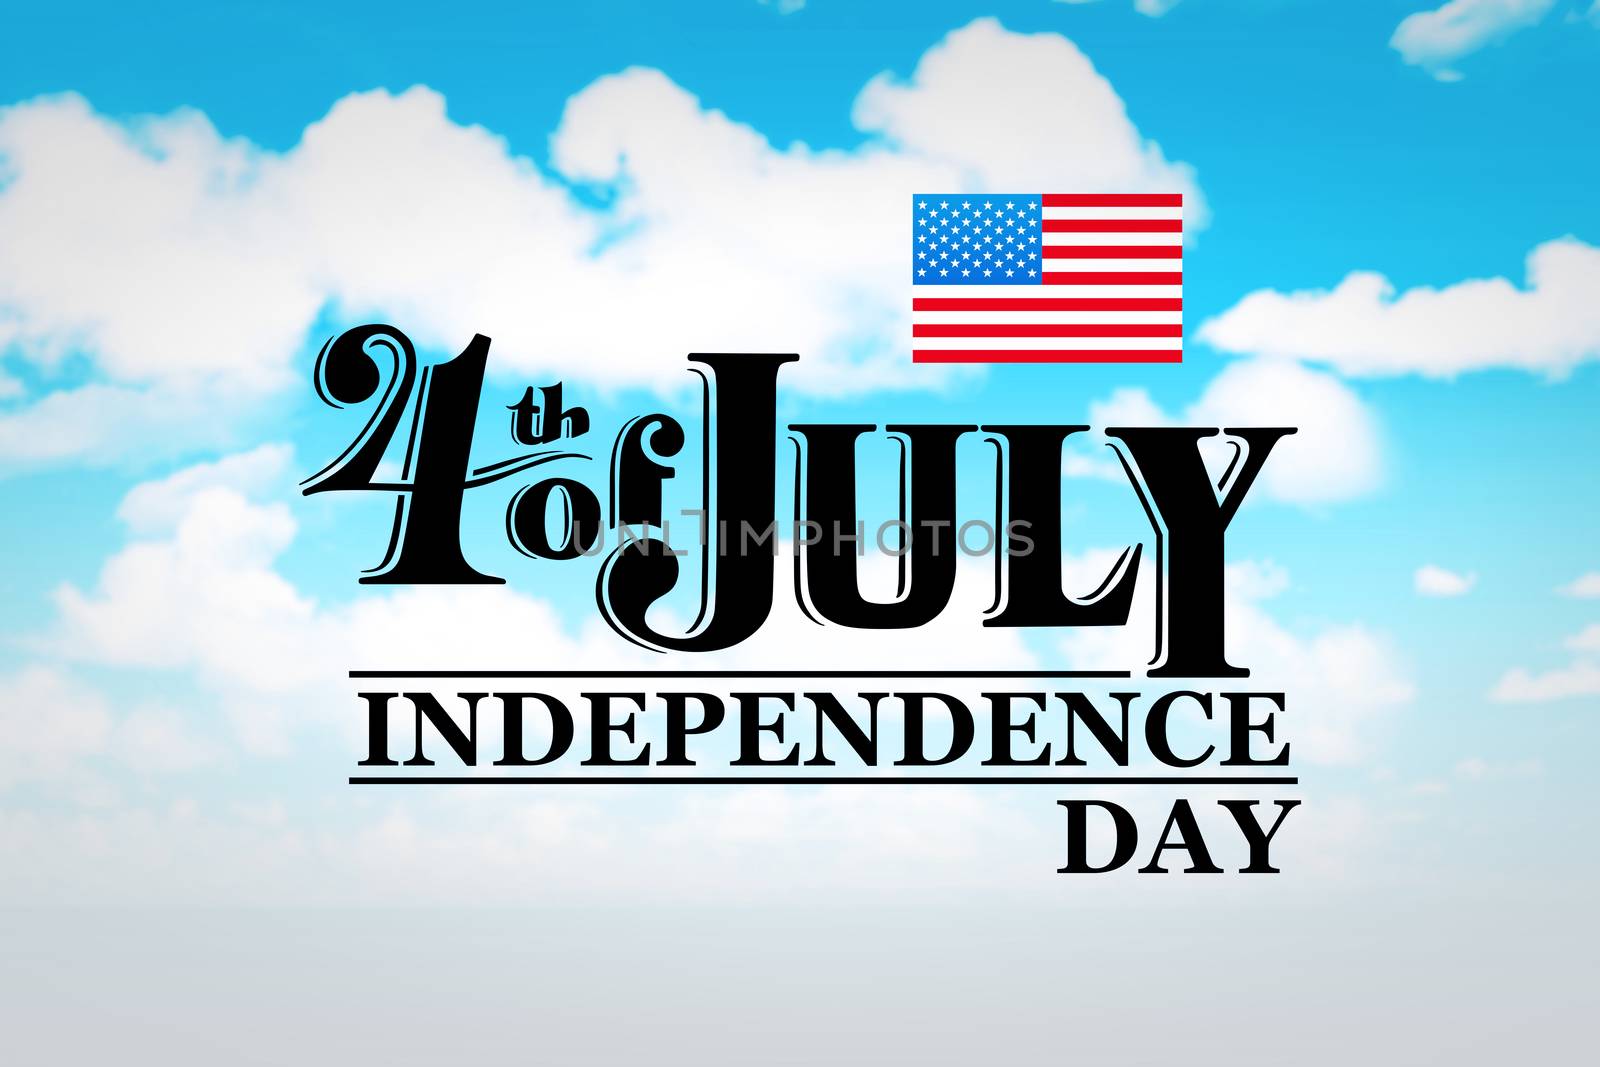 Independence day graphic against blue sky